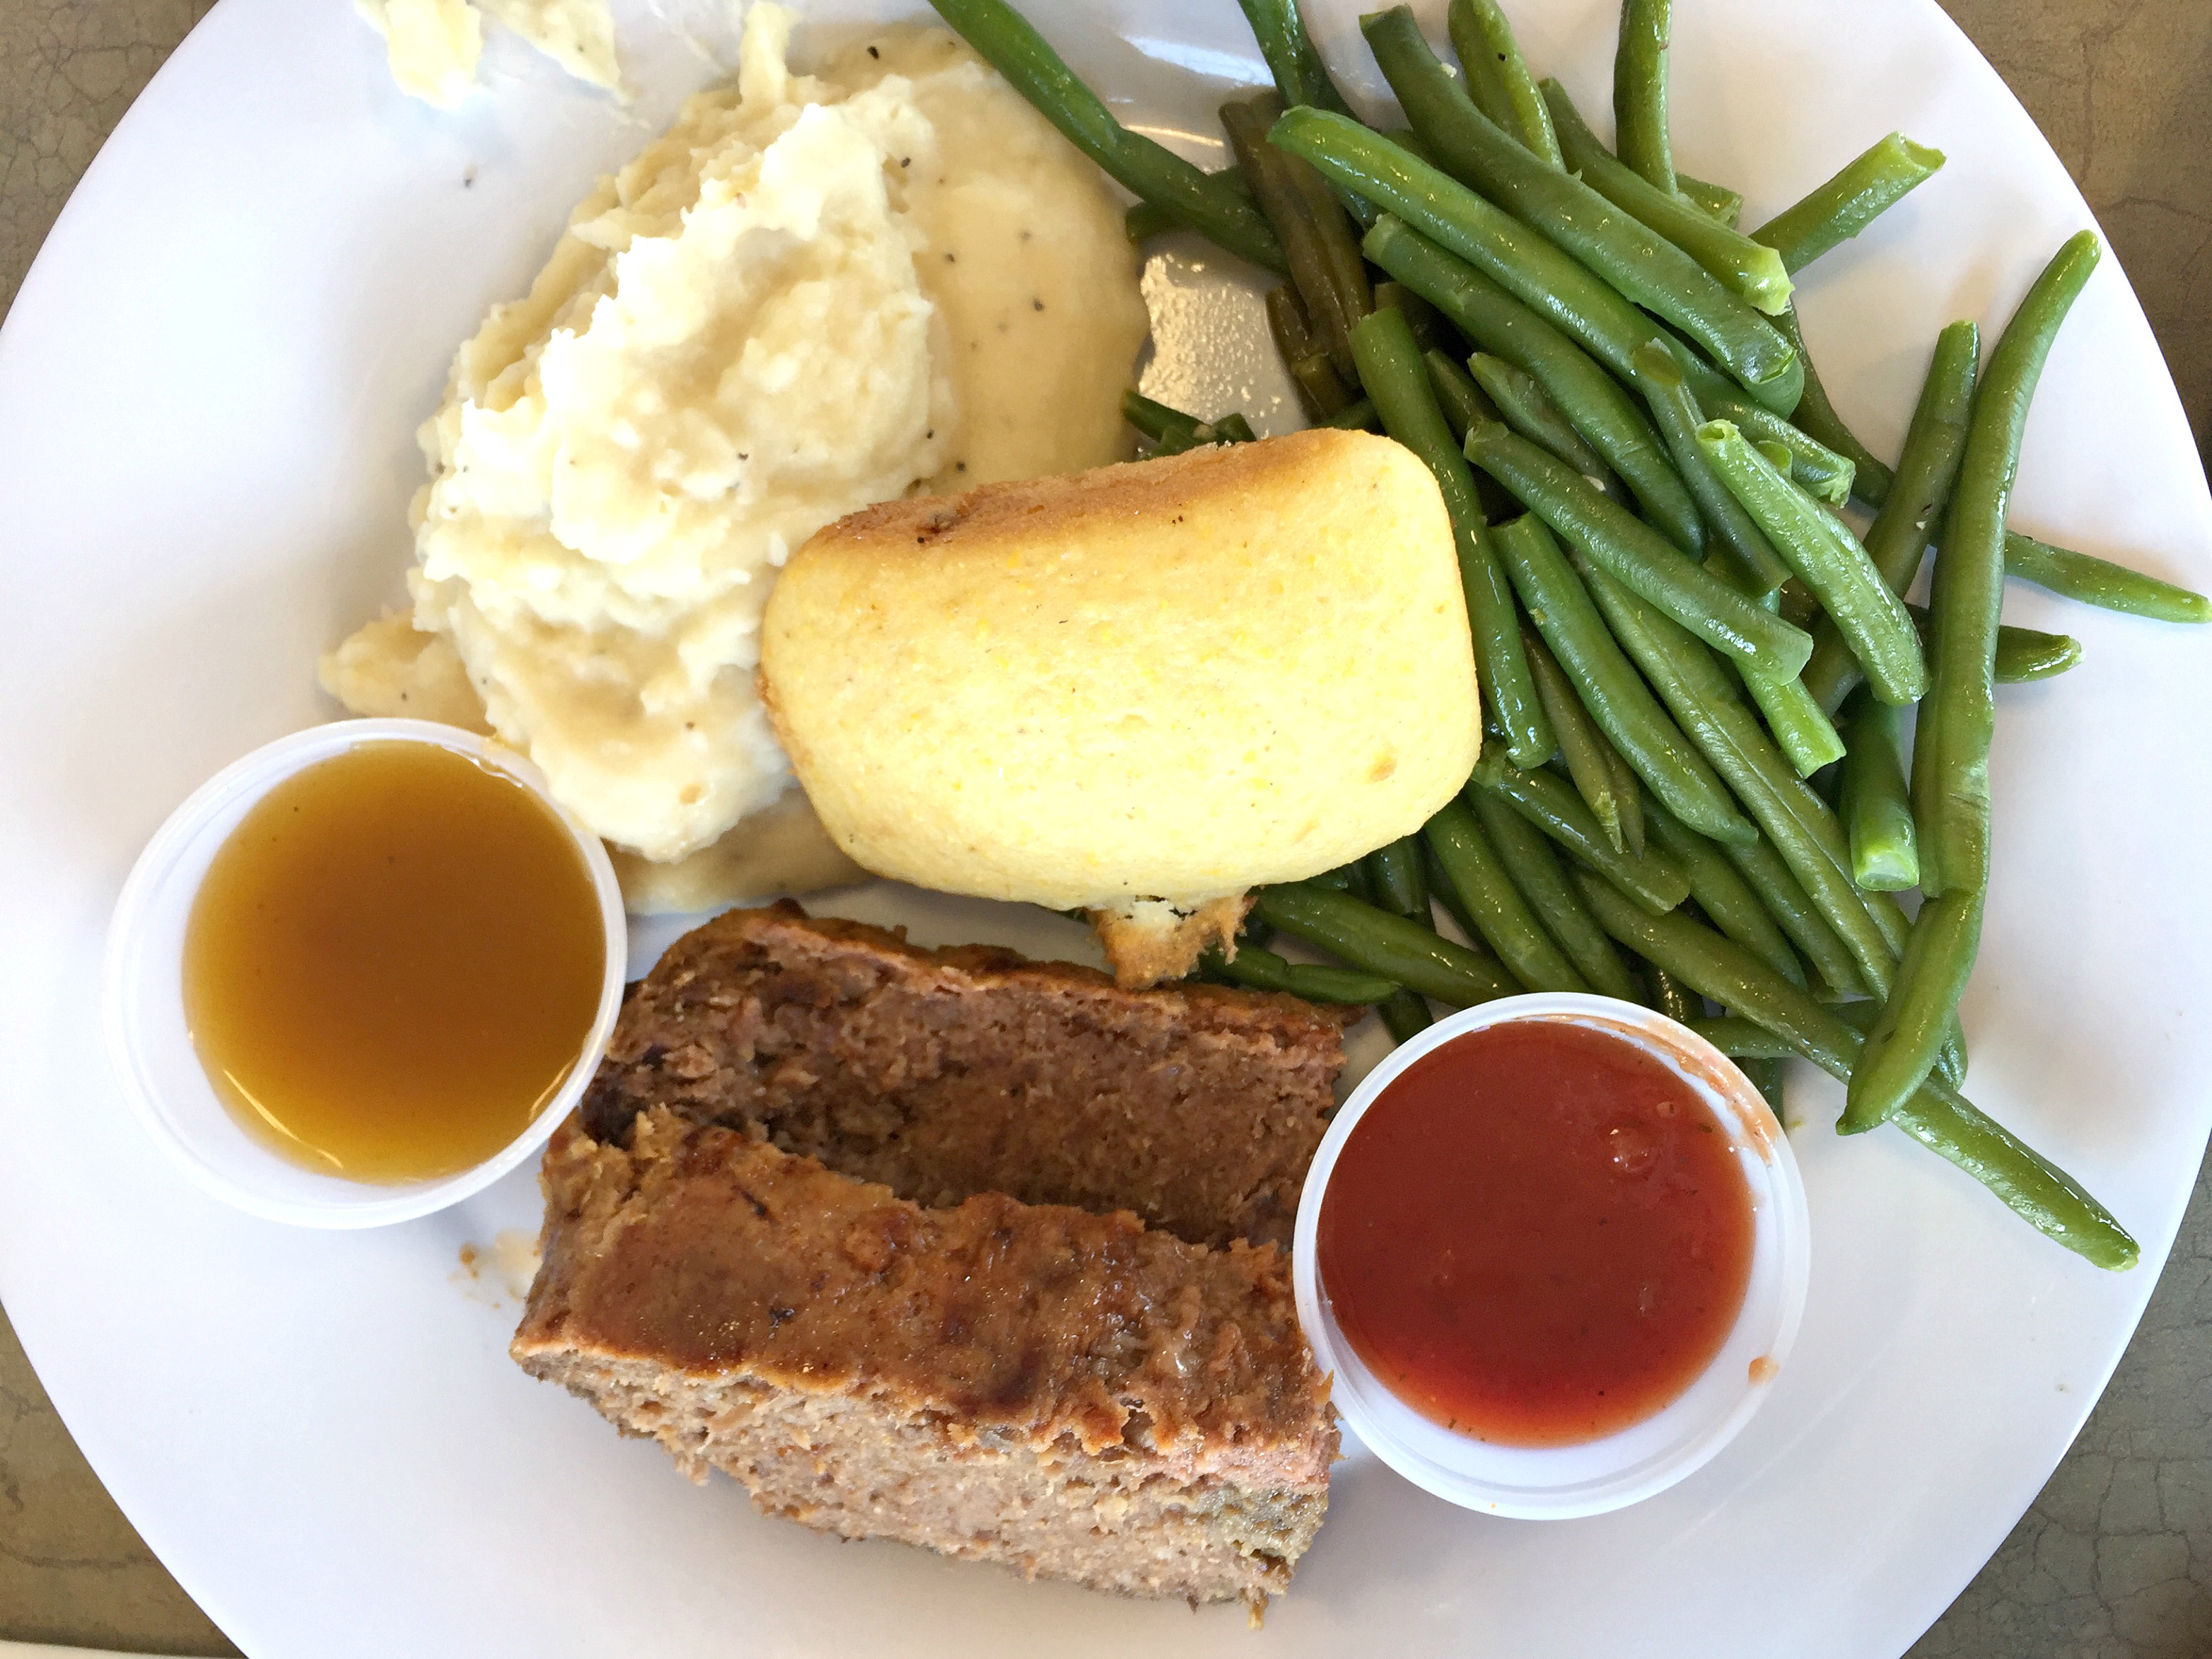 Take advantage of the 2 for $20 meal deal at Boston Market and get a night off from cooking and cleaning mom!